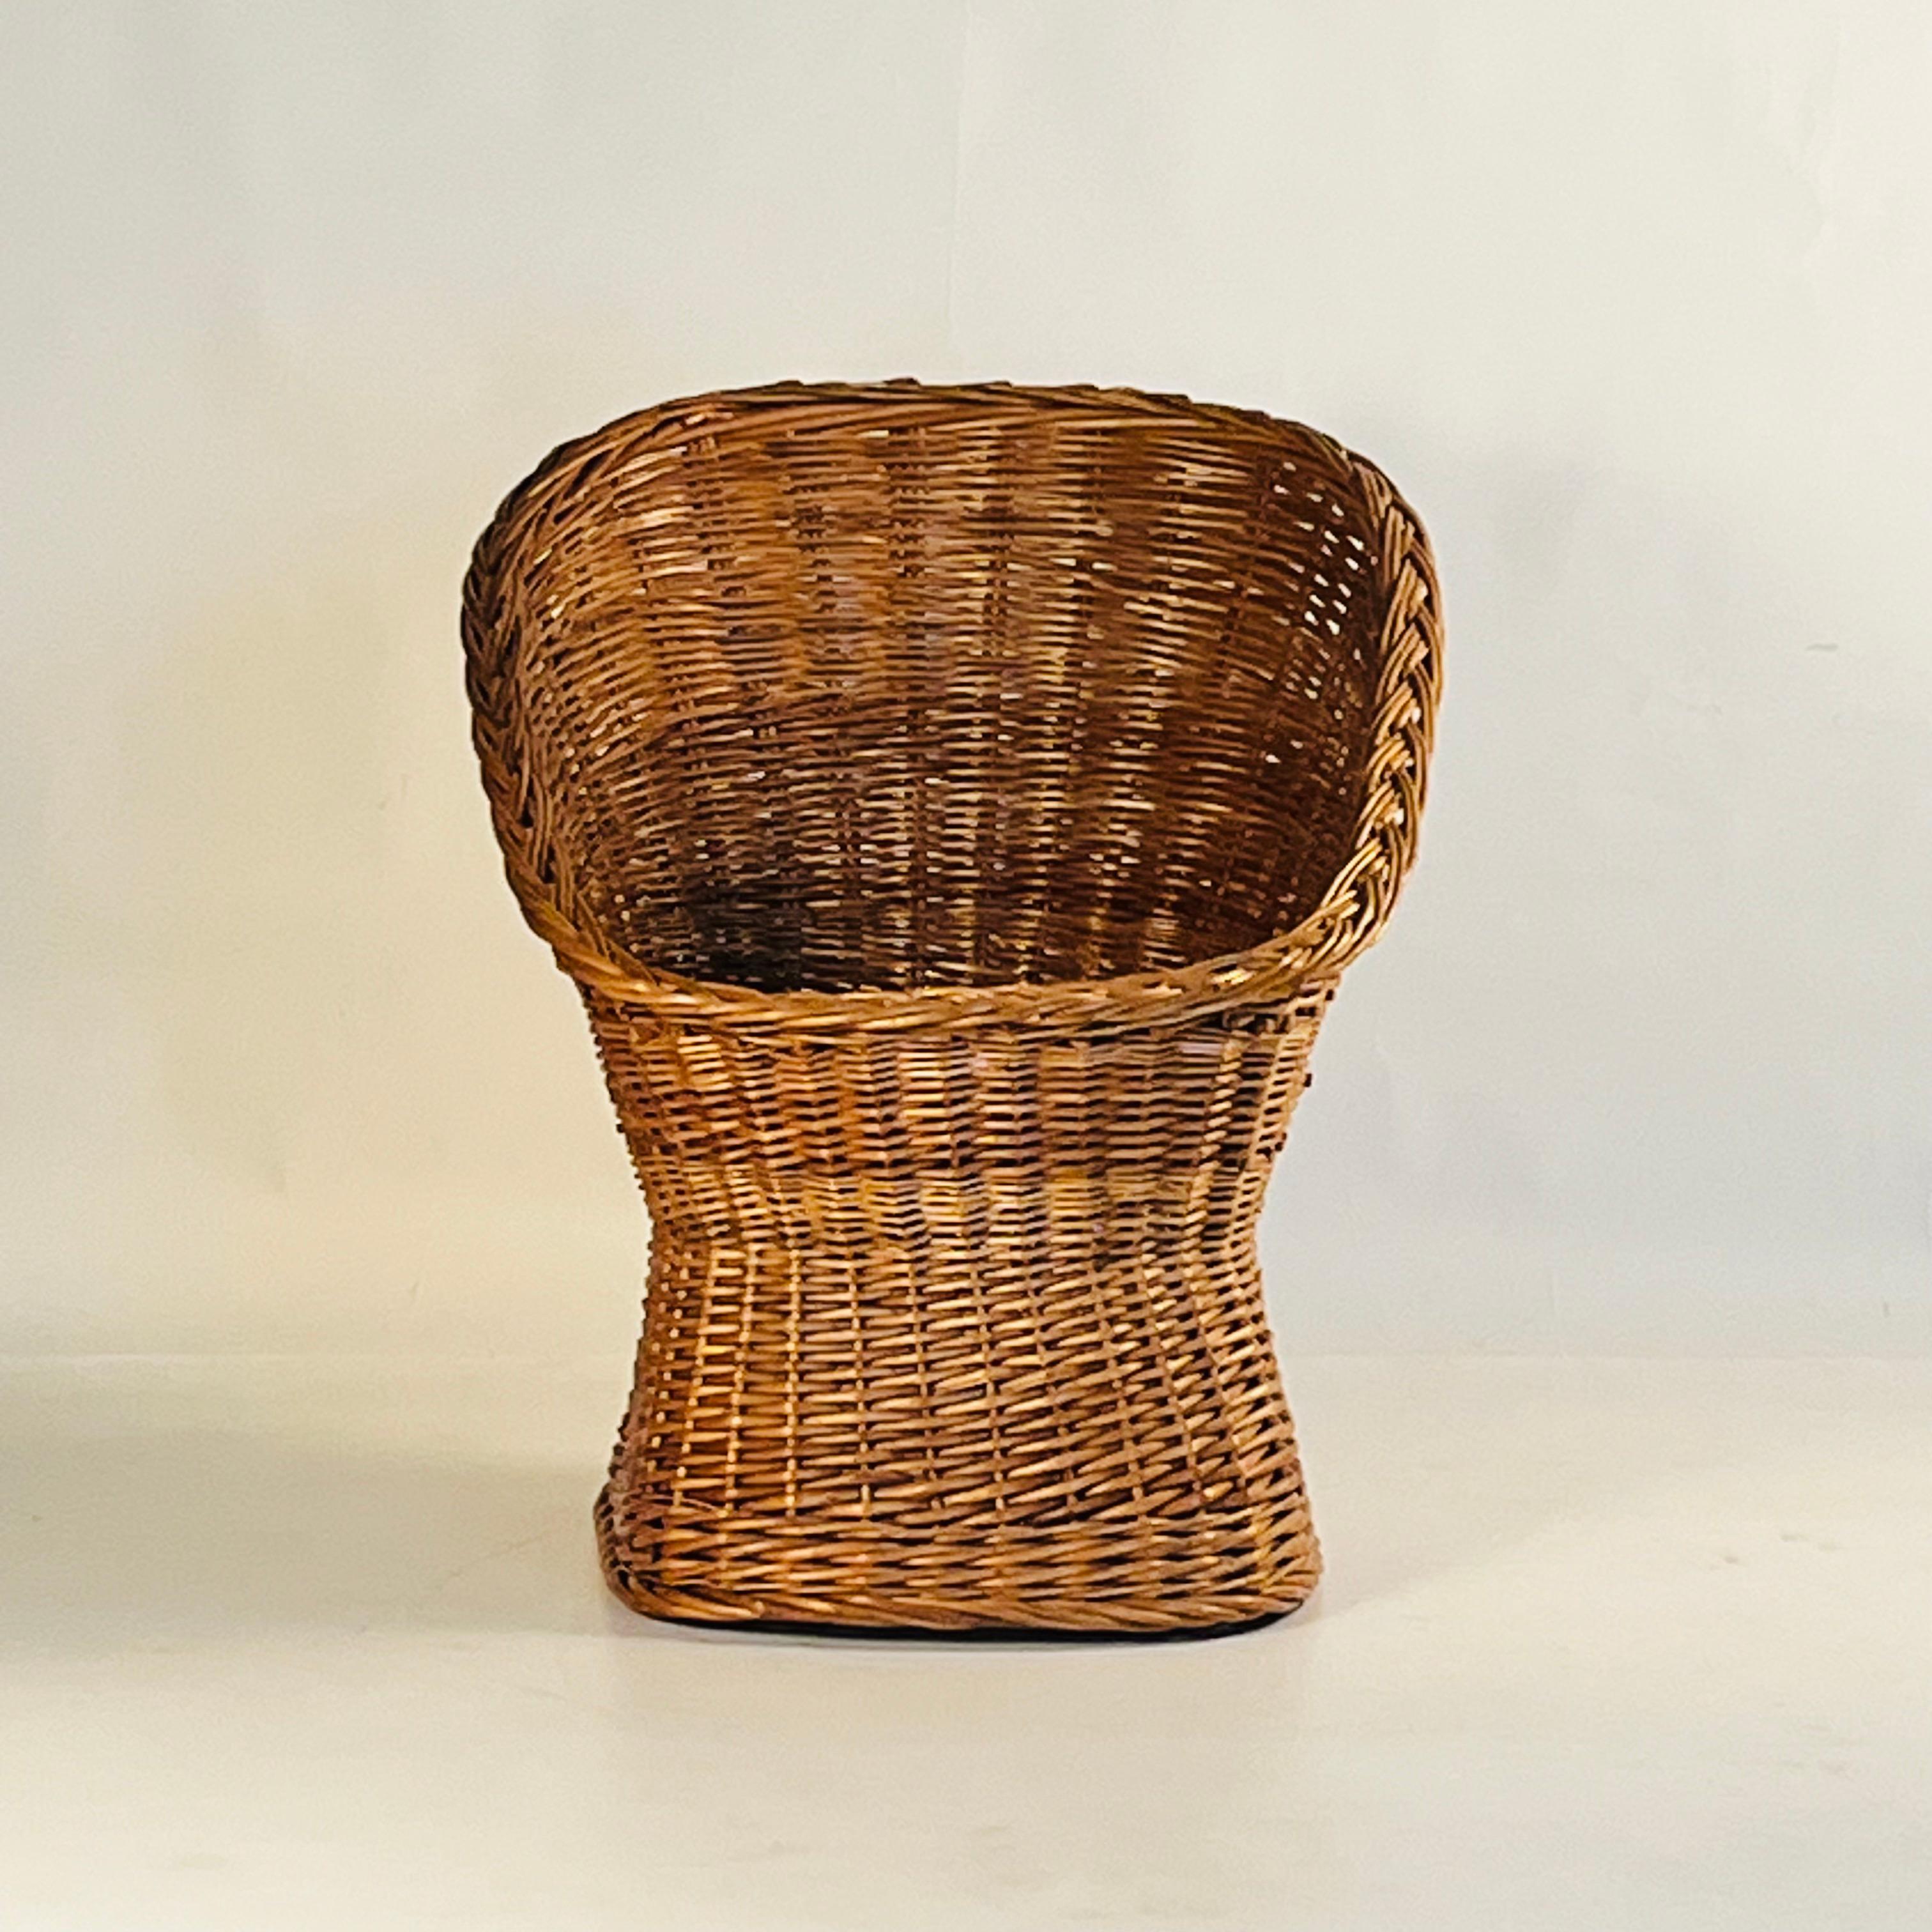 Organic Modern Woven Rattan Wicker Barrel Chair with Shearling Pad For Sale